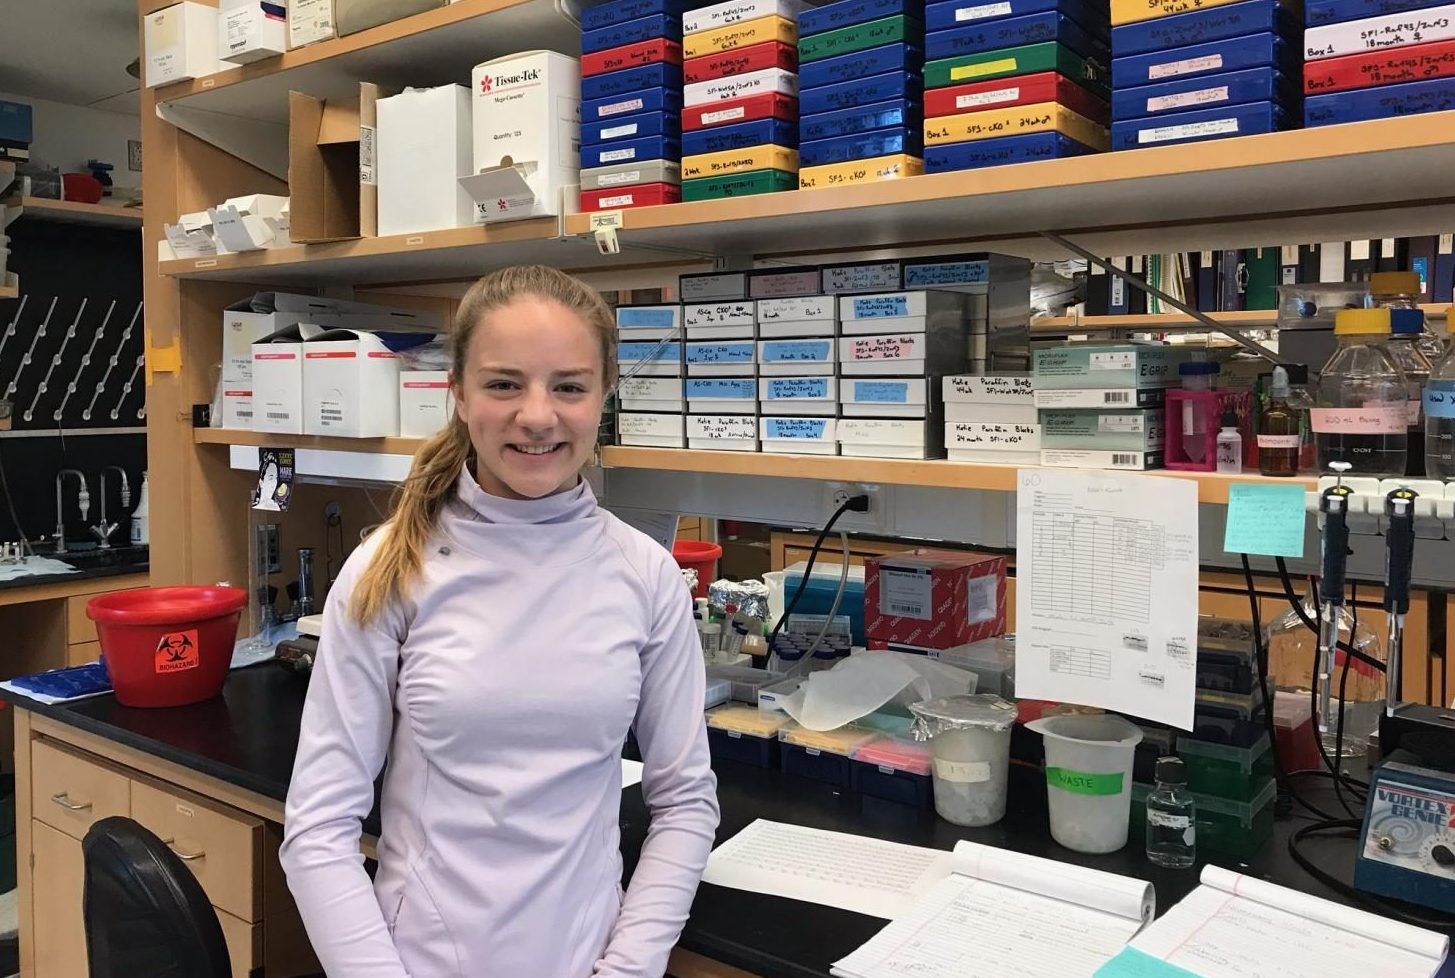 Ammer in the Hammer lab. “The work that Im doing is to learn more about adrenal biology specifically and what happens in the adrenal with cancer,” Ammer said. “Once we know more about that, then we can better focus treatments.”